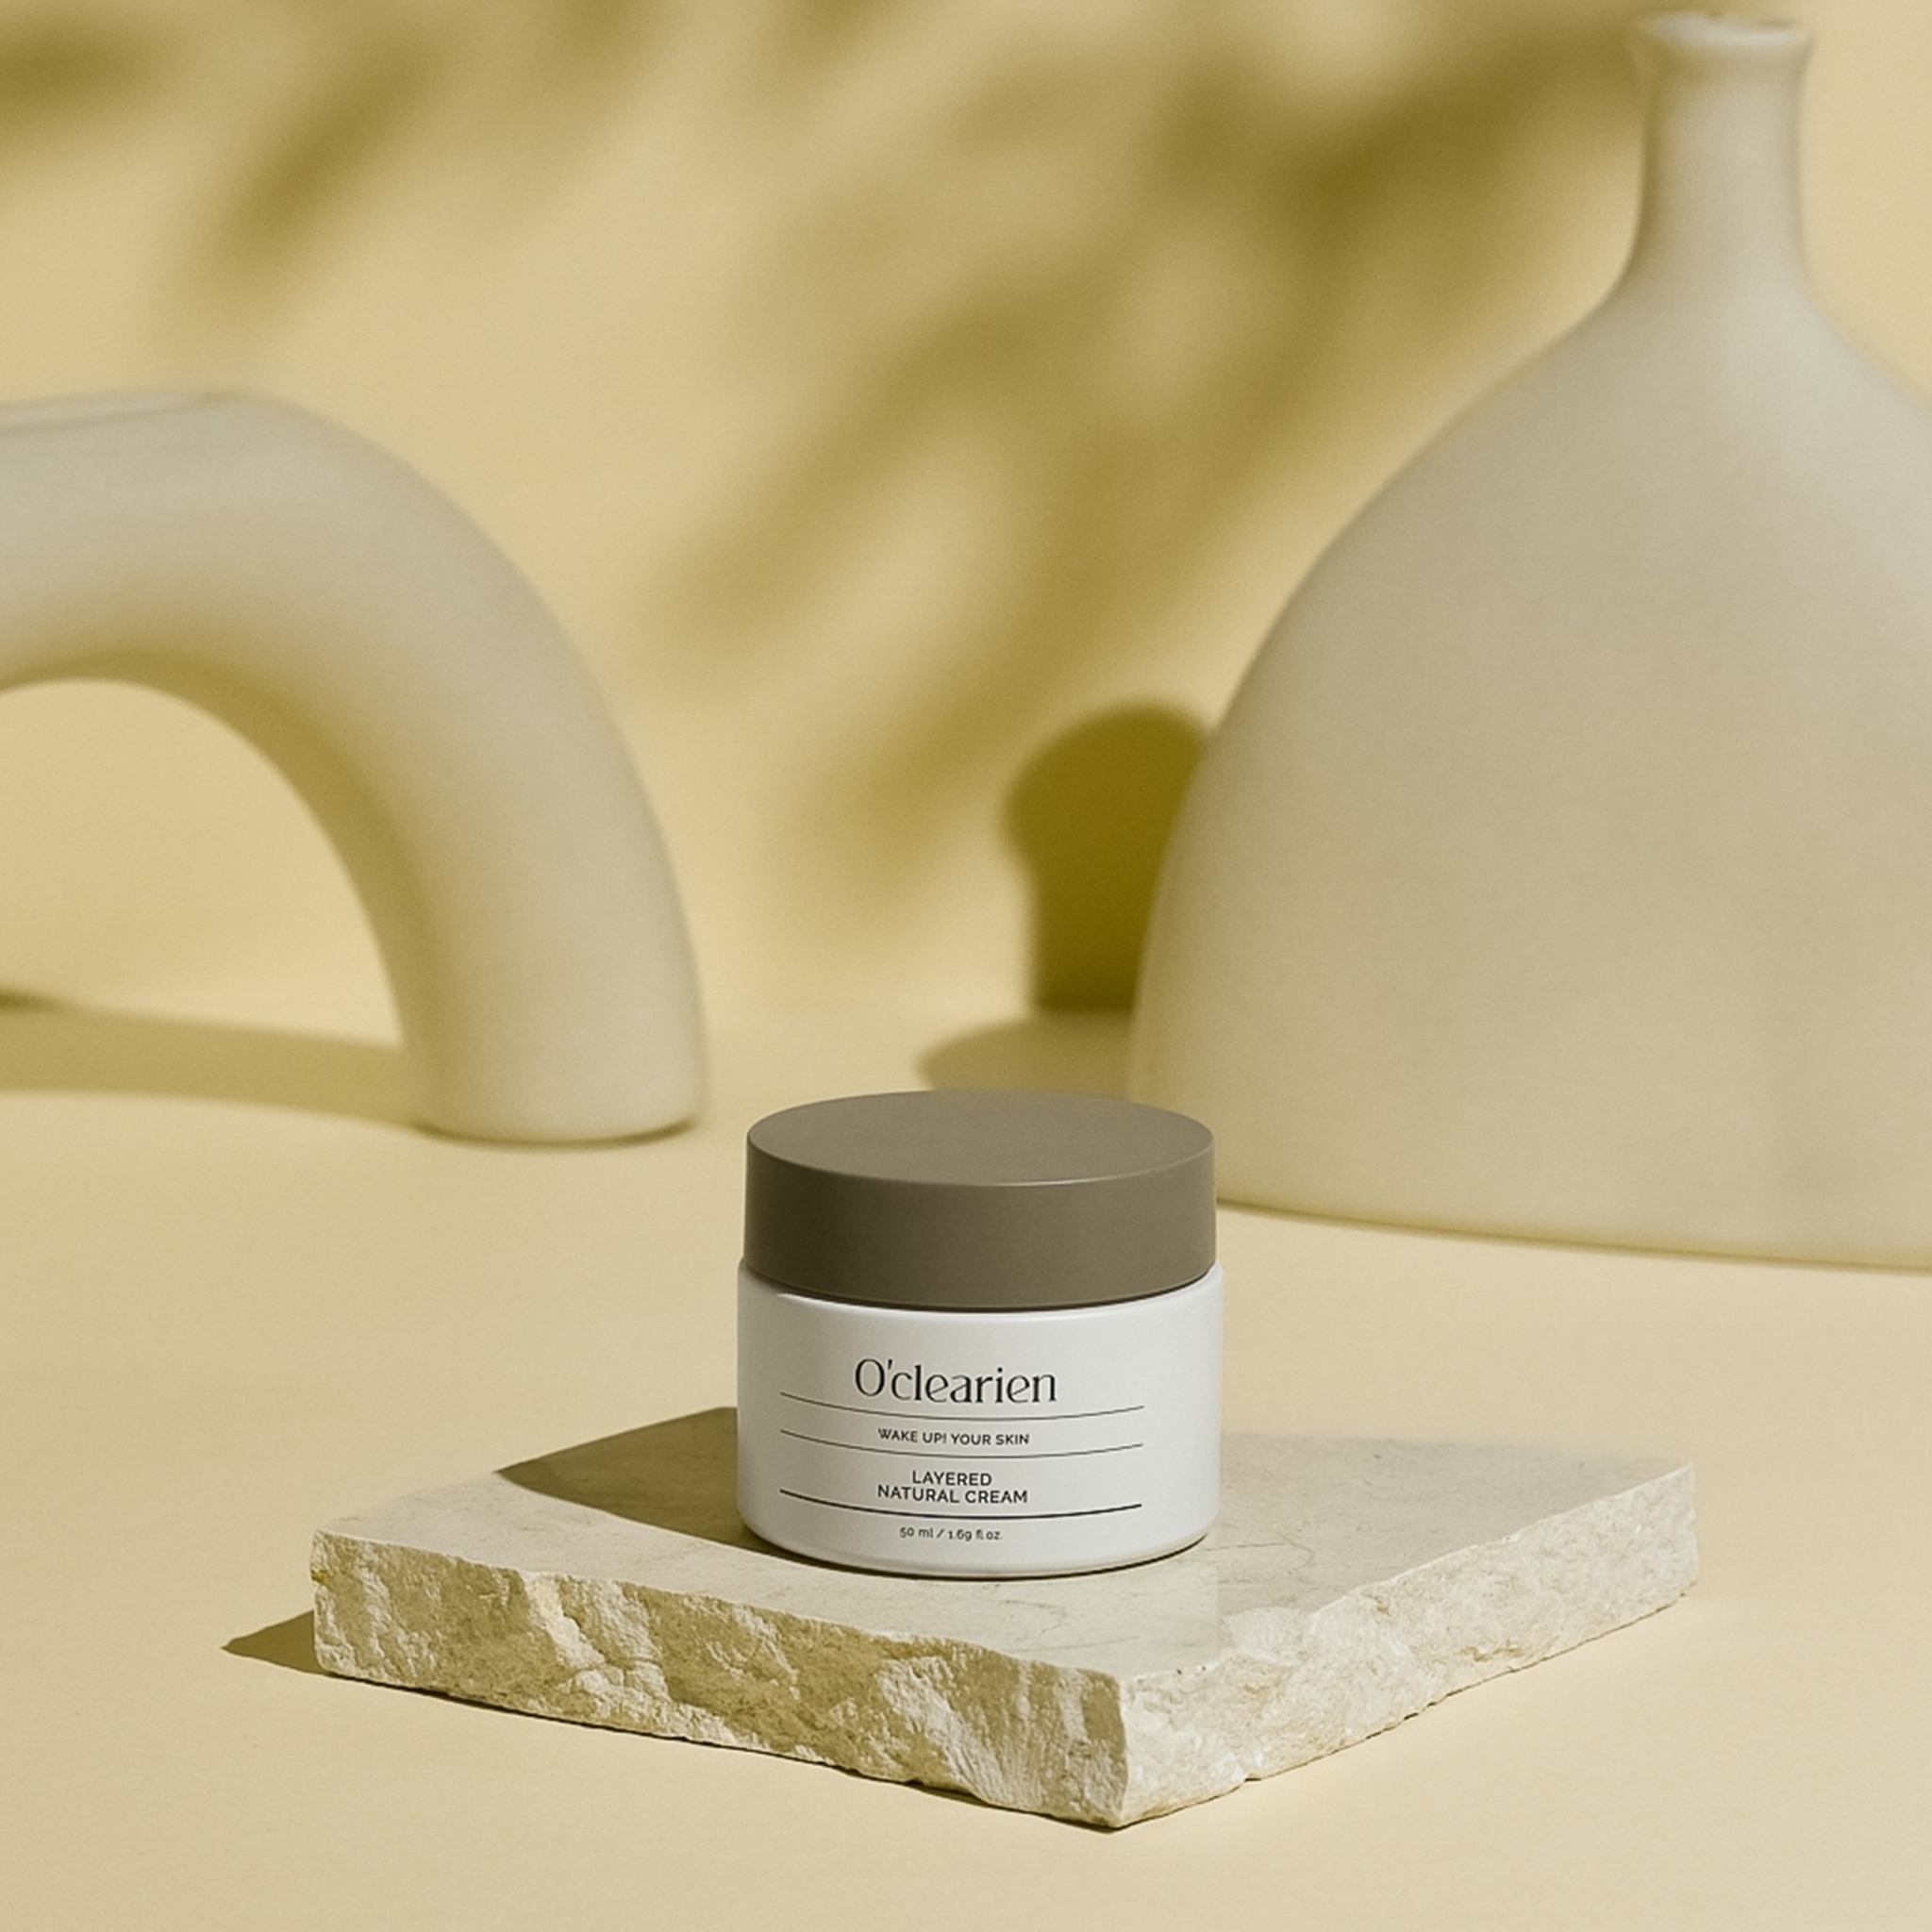 natural cream is on a rock against two yellow potteries background.